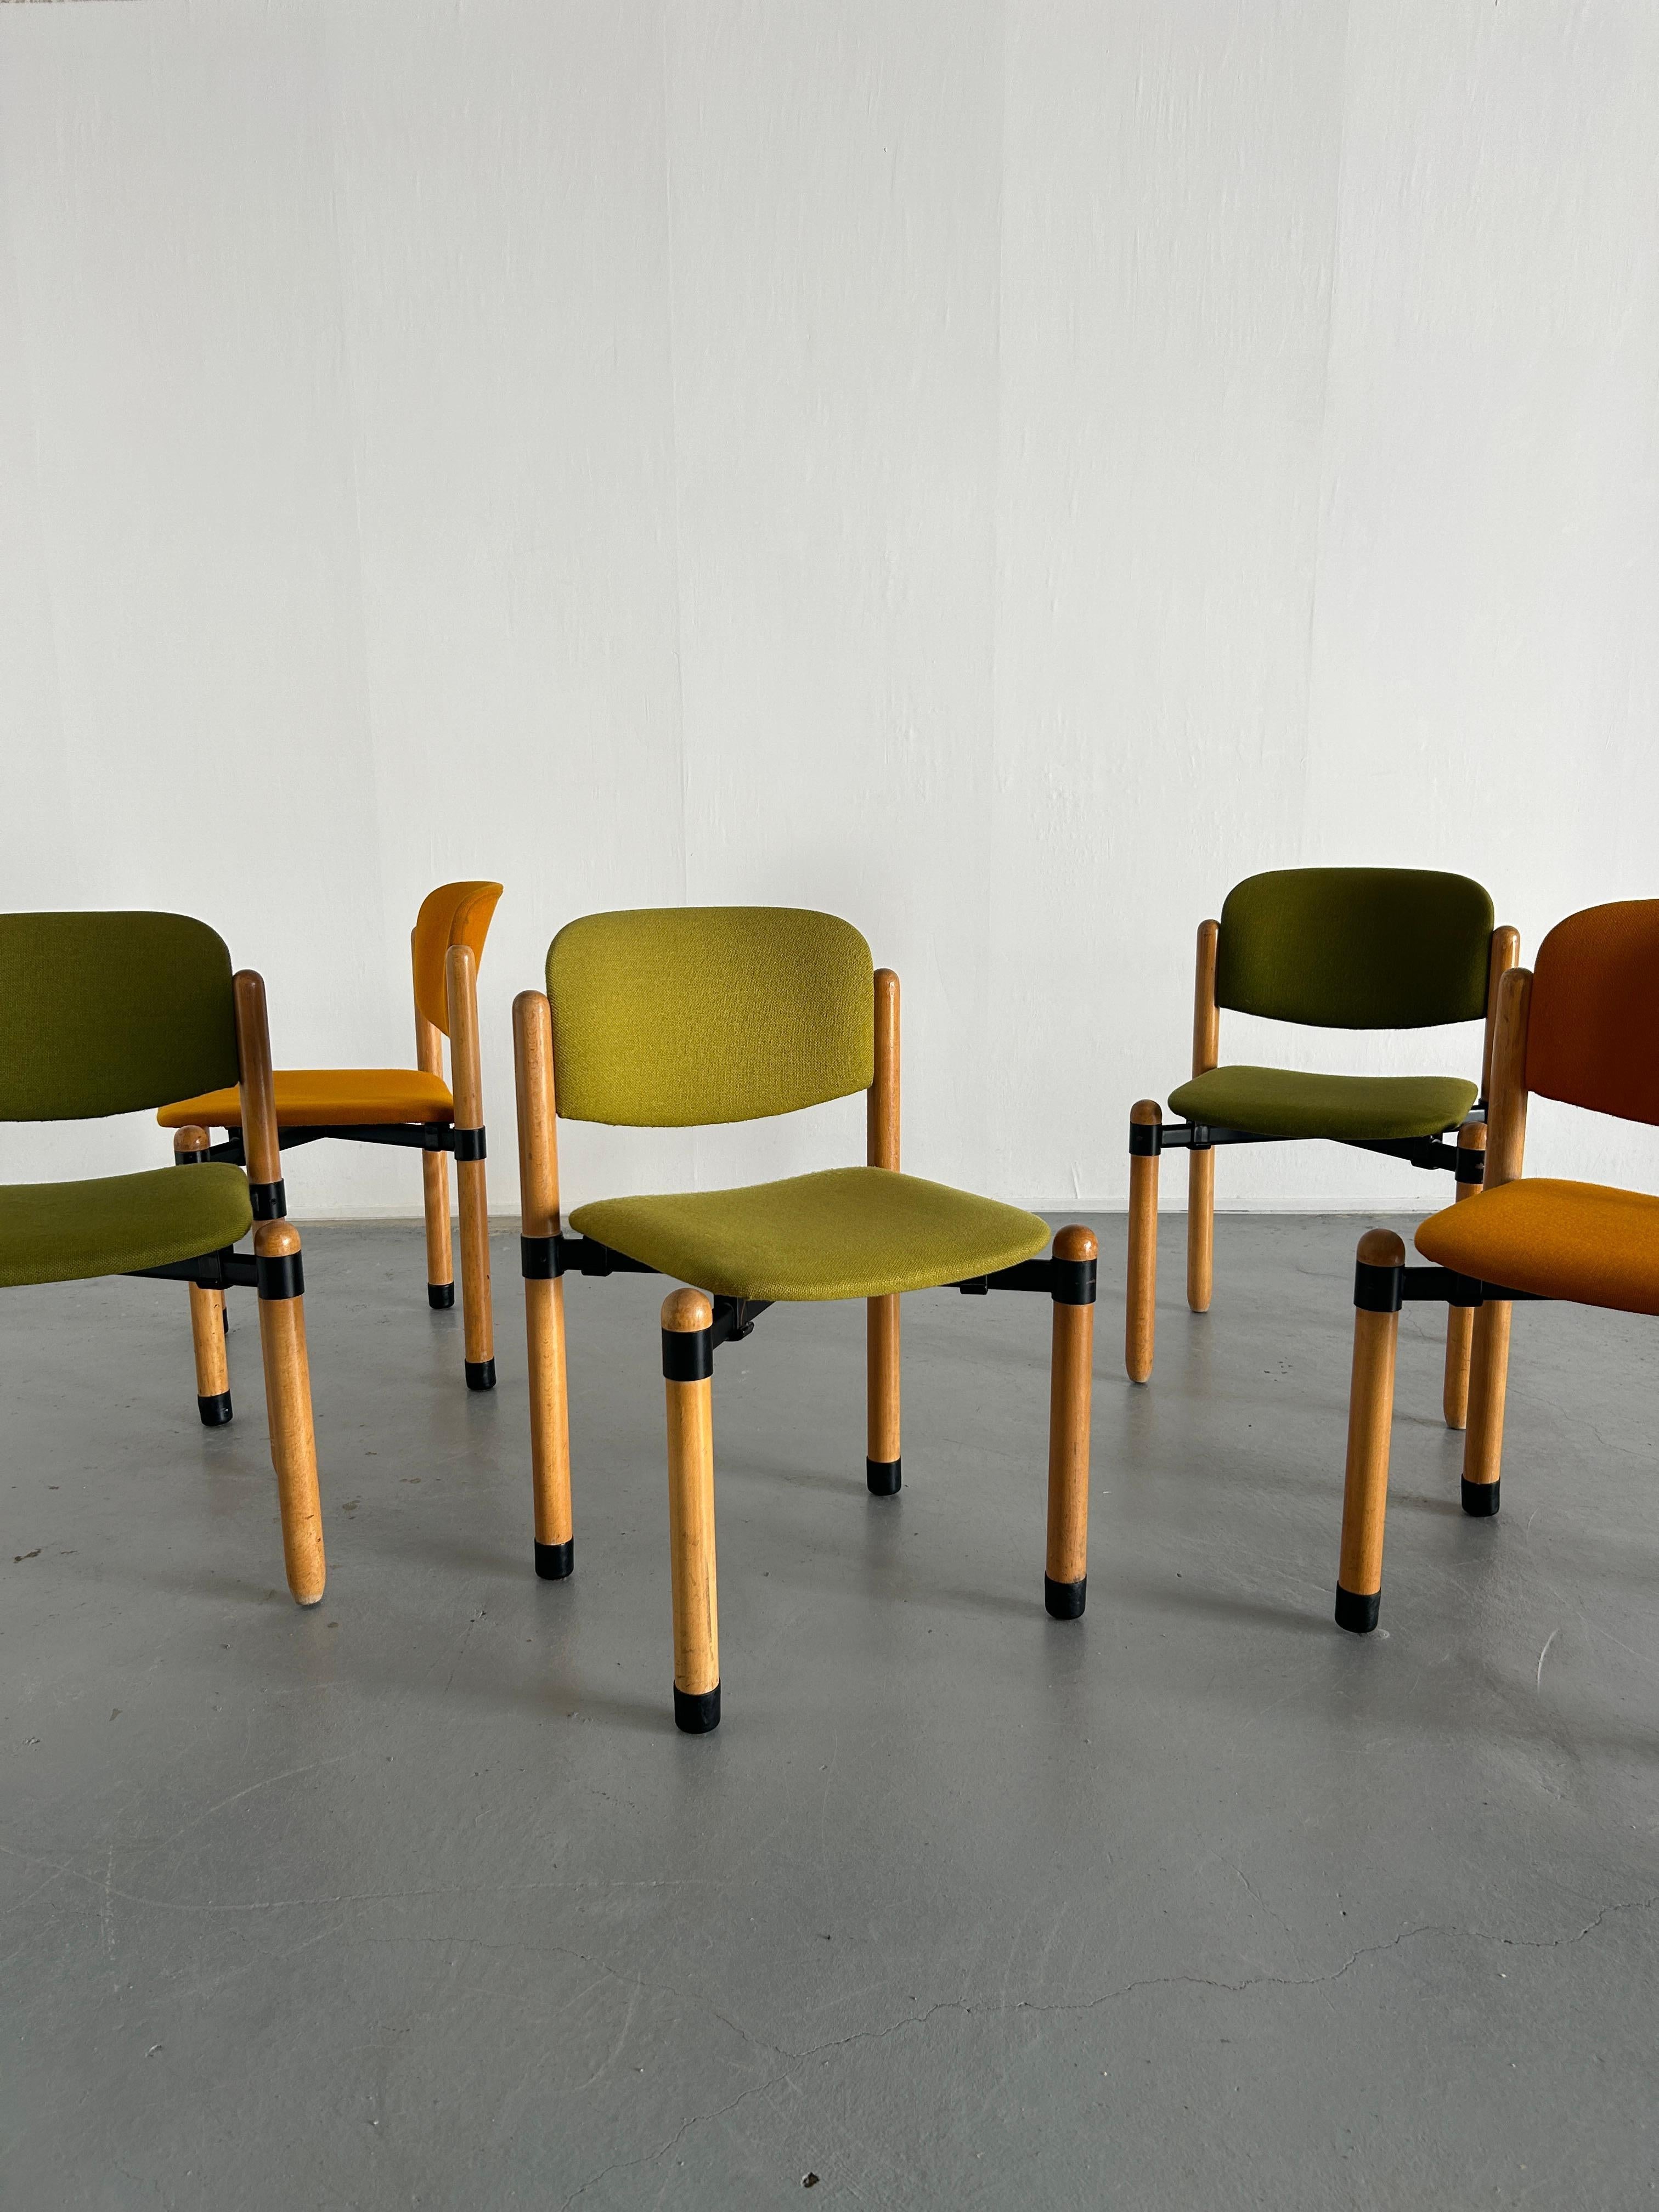 Mid-Century Modern stackable dining charis or visitor chairs produced by Fröscher Sitform, 1970s West Germany.
Robust and high production quality.
30 pieces available.

In very good vintage condition with smaller expected signs of age. 
Structurally